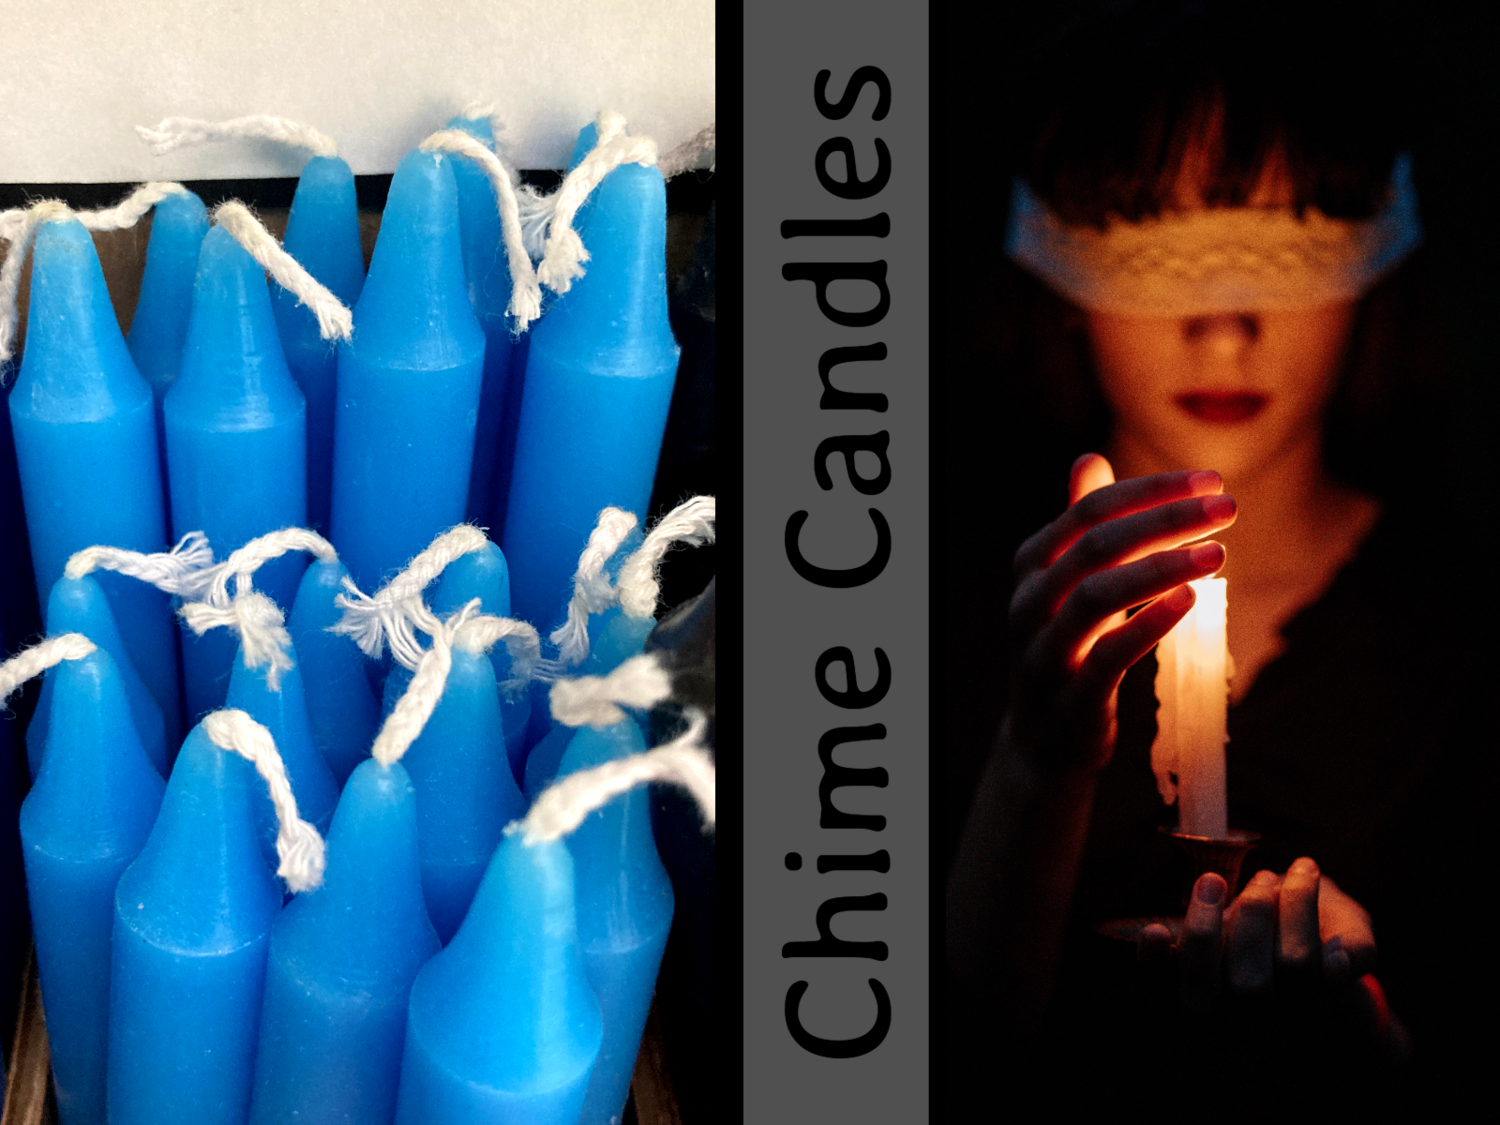 4” Light Blue Chime Candles -